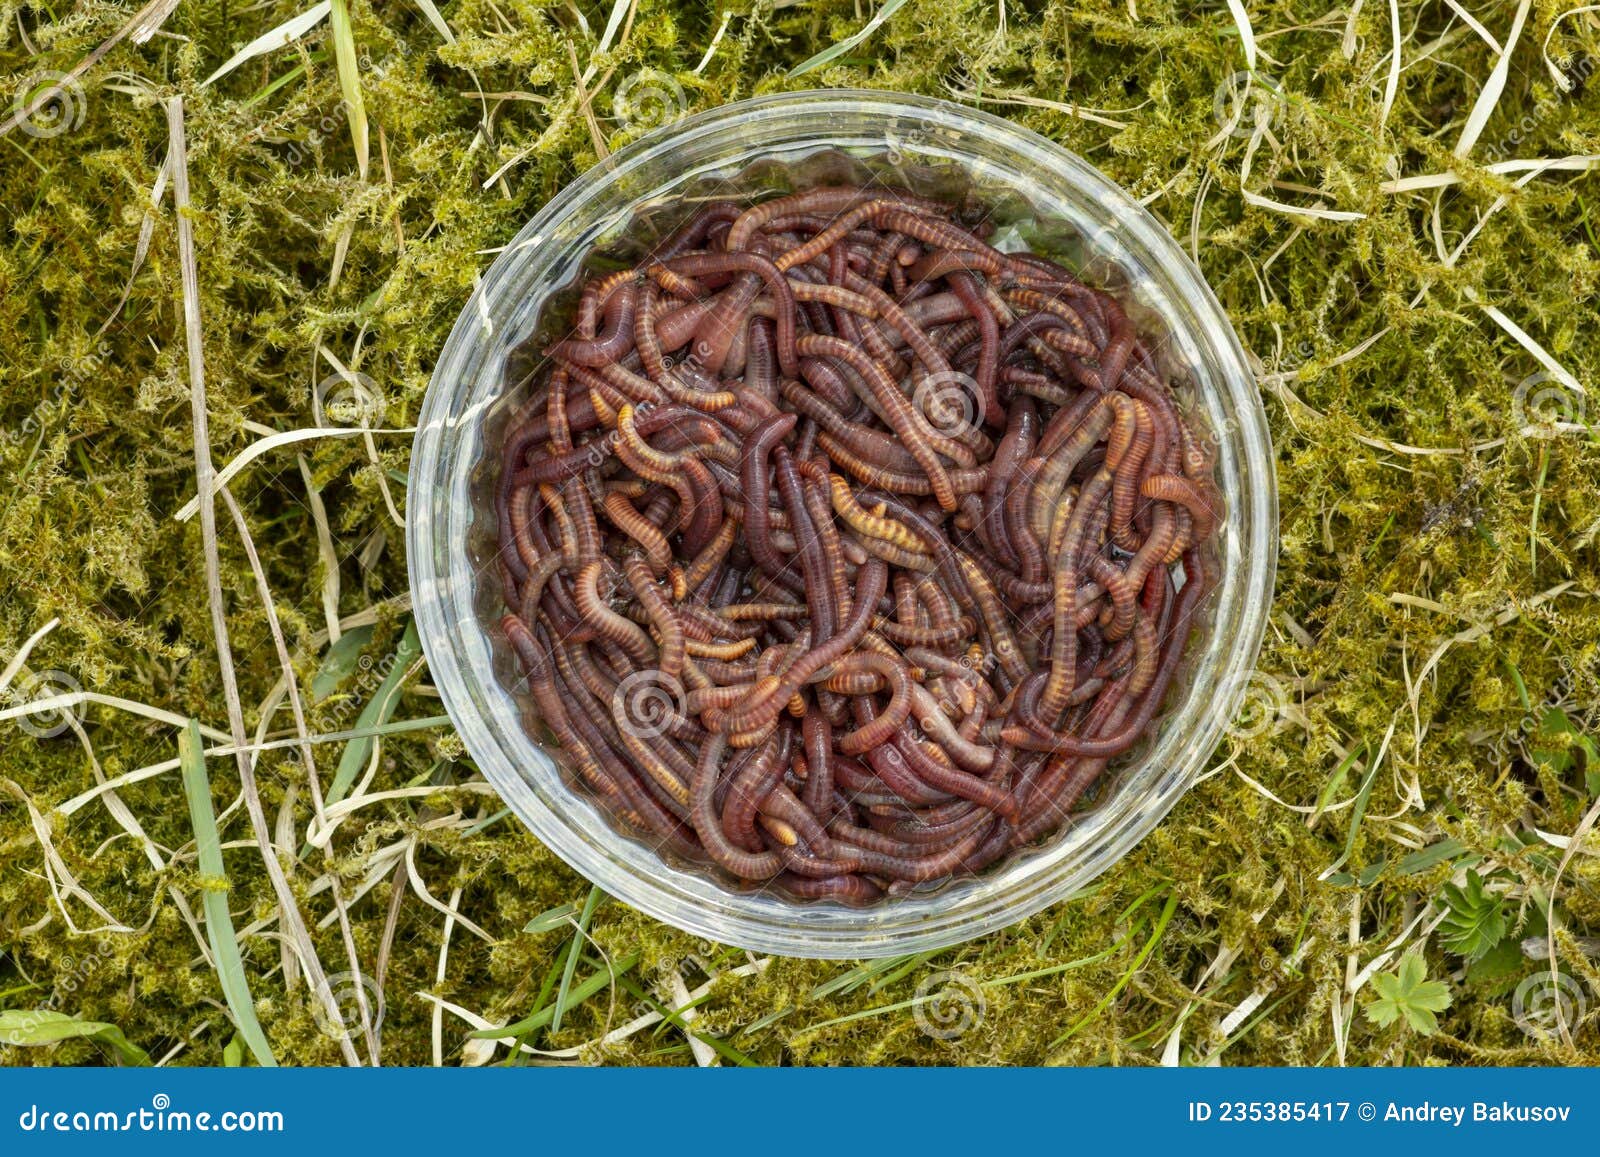 Worms in a Jar on Green Grass, Fishing Bait and Compost Worms in a